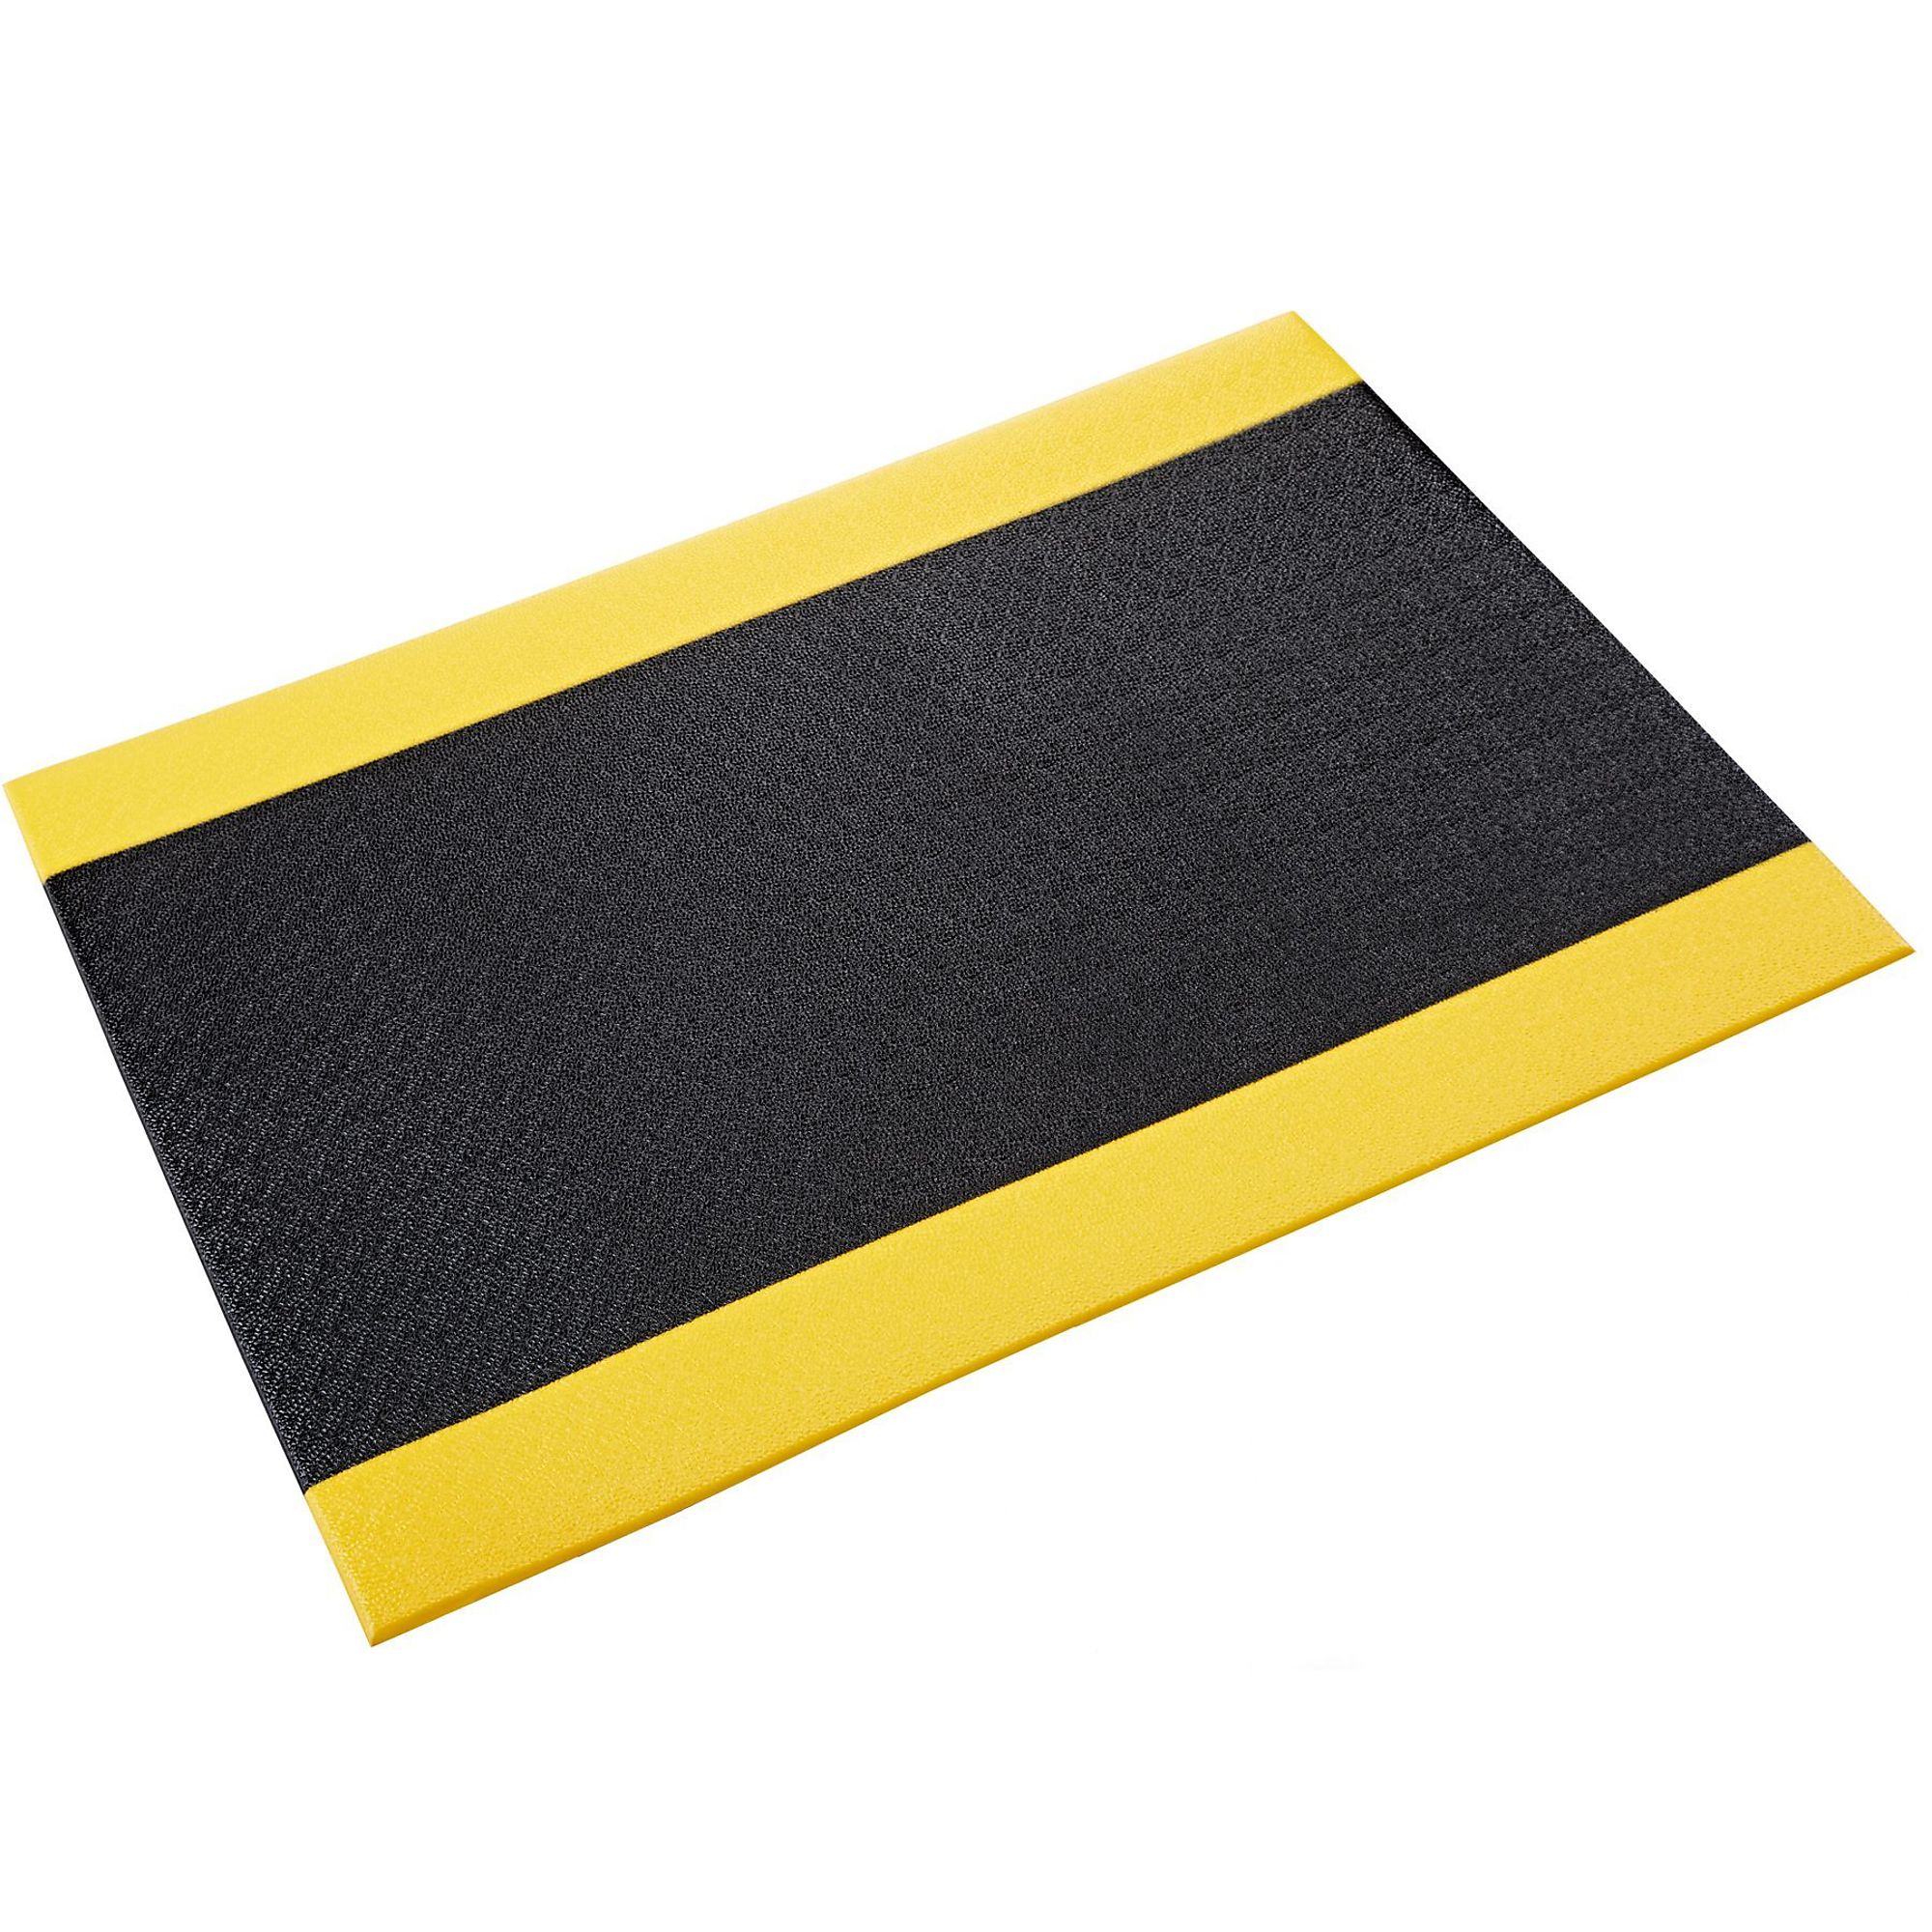 Comfort King Anti-Fatigue Mat - 3 x 12 ft - 1/2 in Thick - Black - Wh1